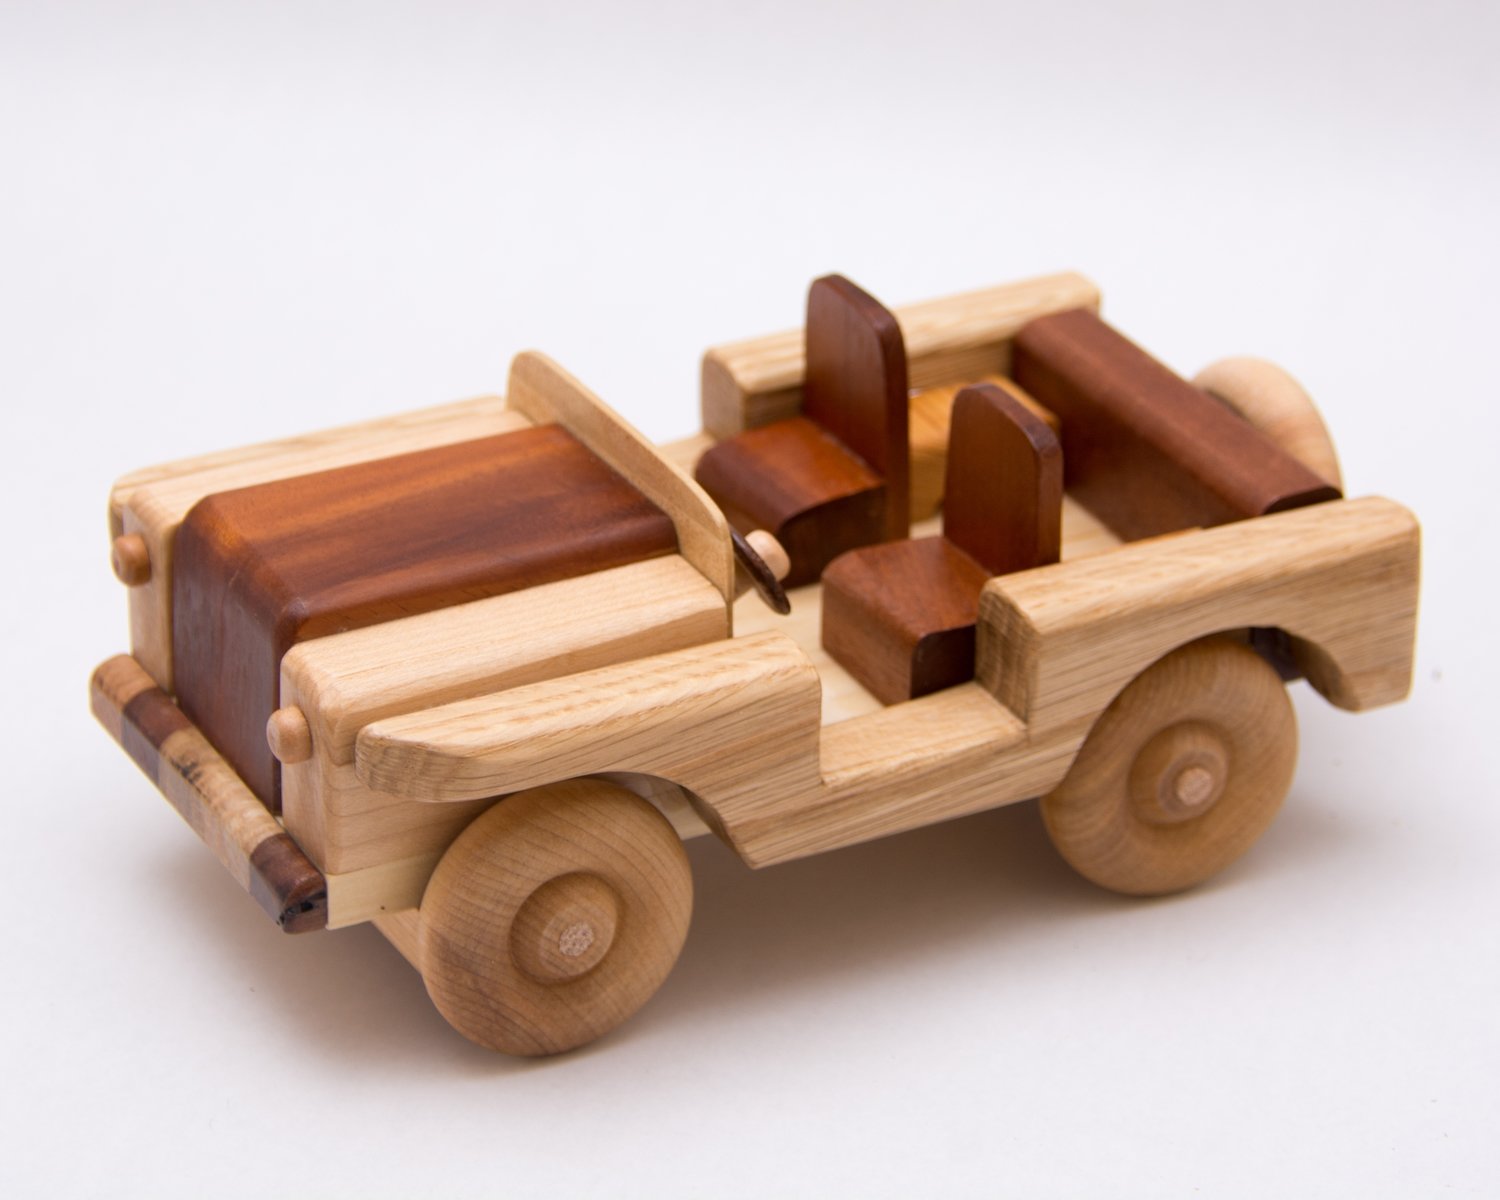 4by4 (J0010) Handmade Wooden Toy Off Road Vehicle / Car by Springer Wood  Works